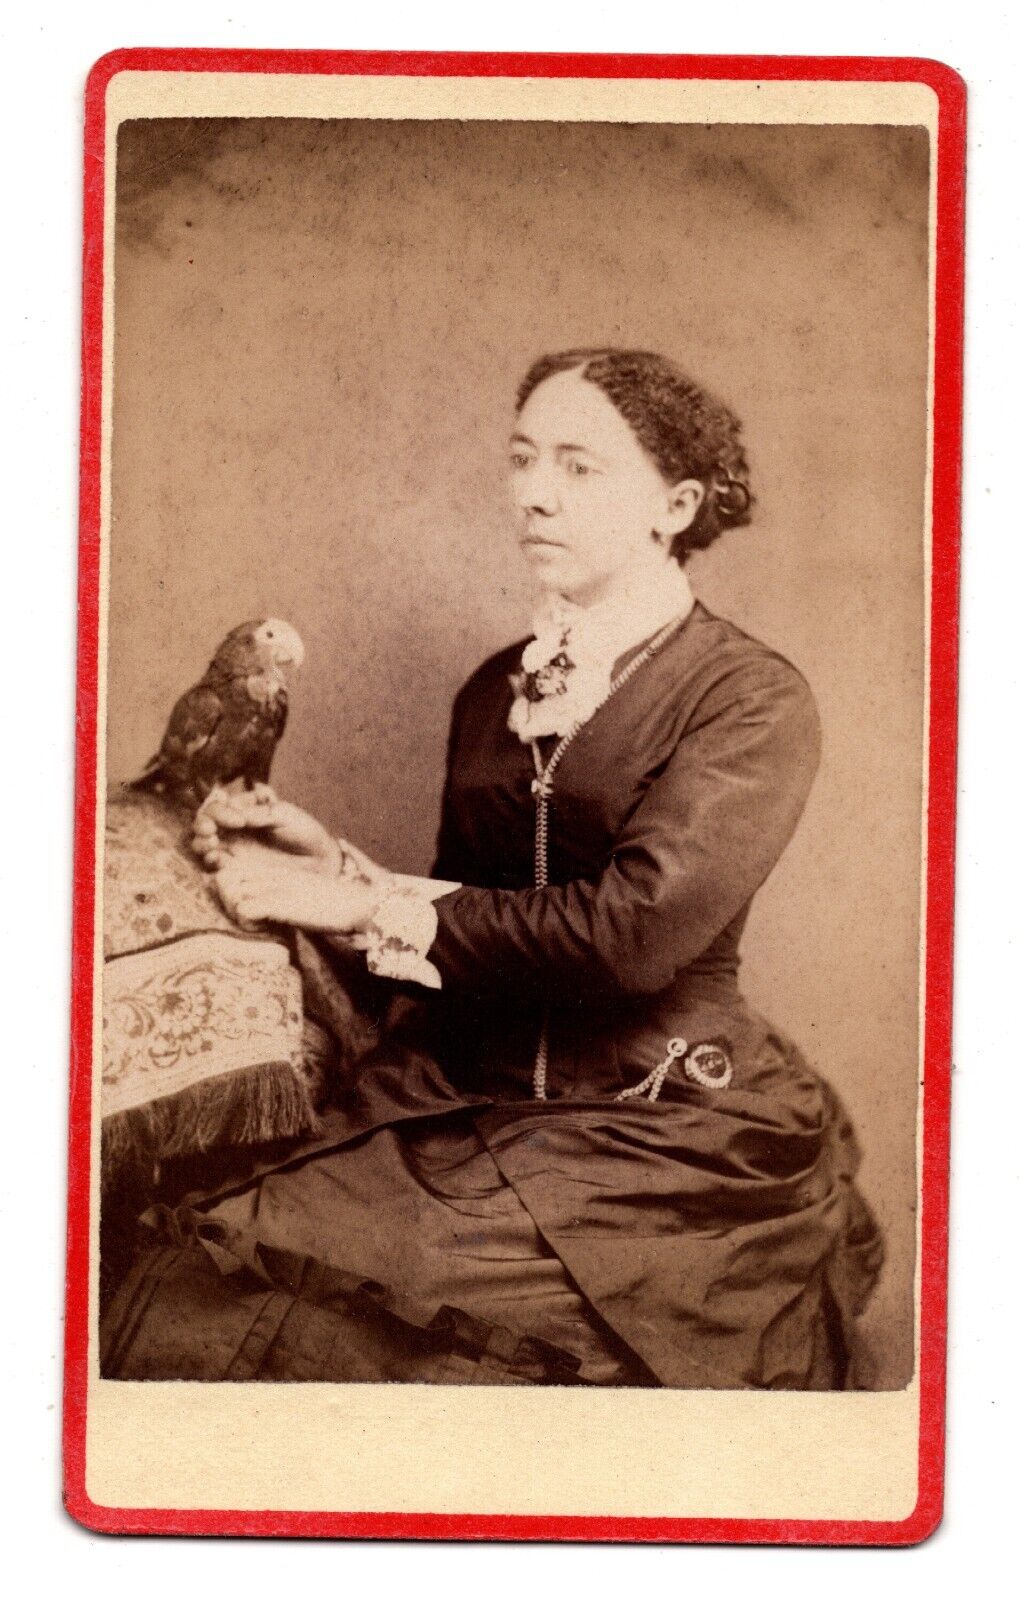 ANTIQUE CDV C. 1870s D. BRENNER GORGEOUS YOUNG LADY HOLDING PARROT BUCYRUS OHIO